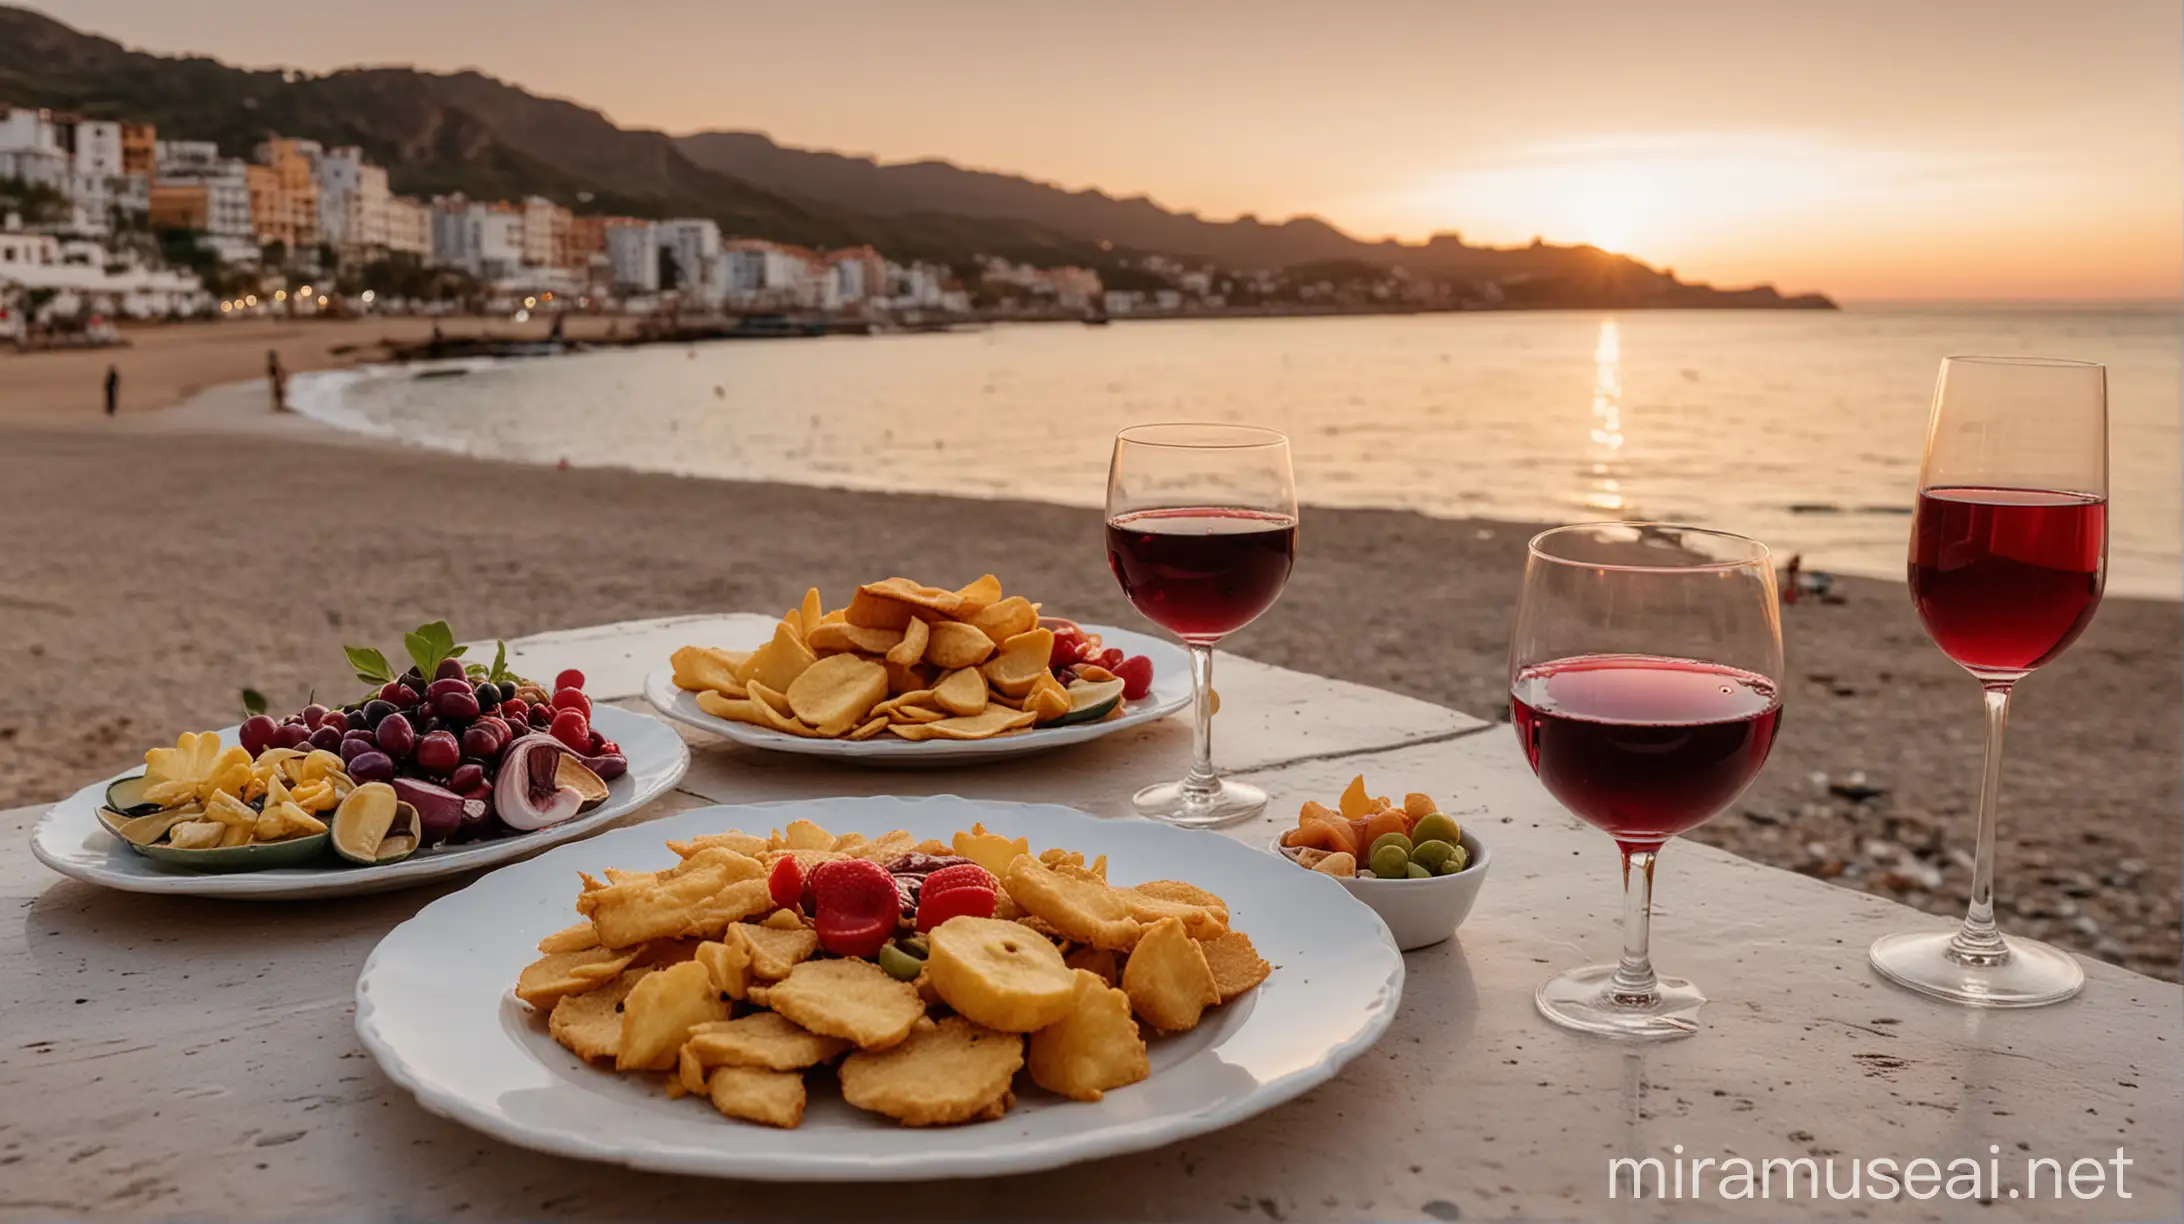 Beachside Dining with Pescadito Frito and Fresh Fruits